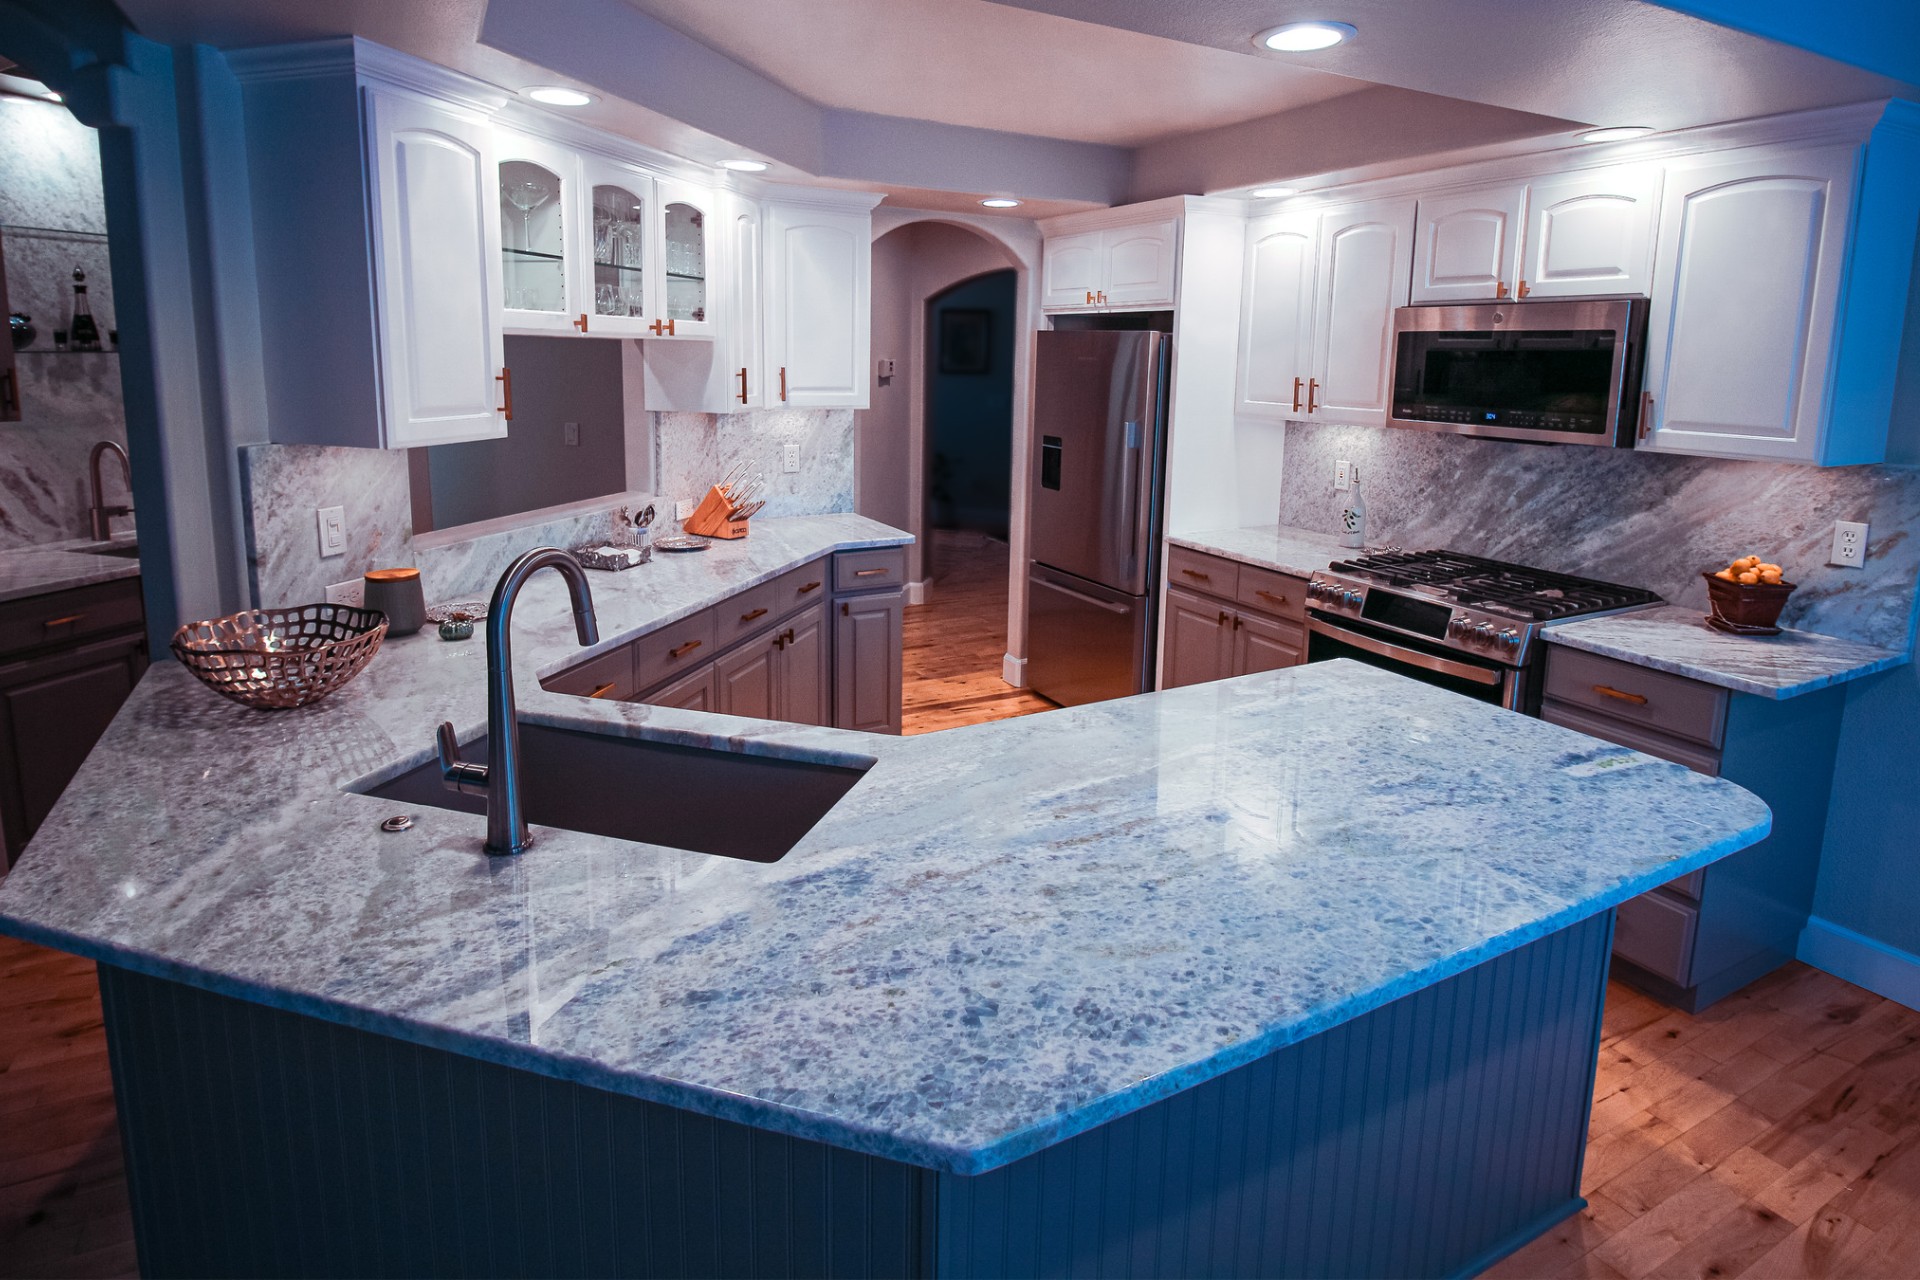 A recent Boise, ID remodel by Snake River Stone.